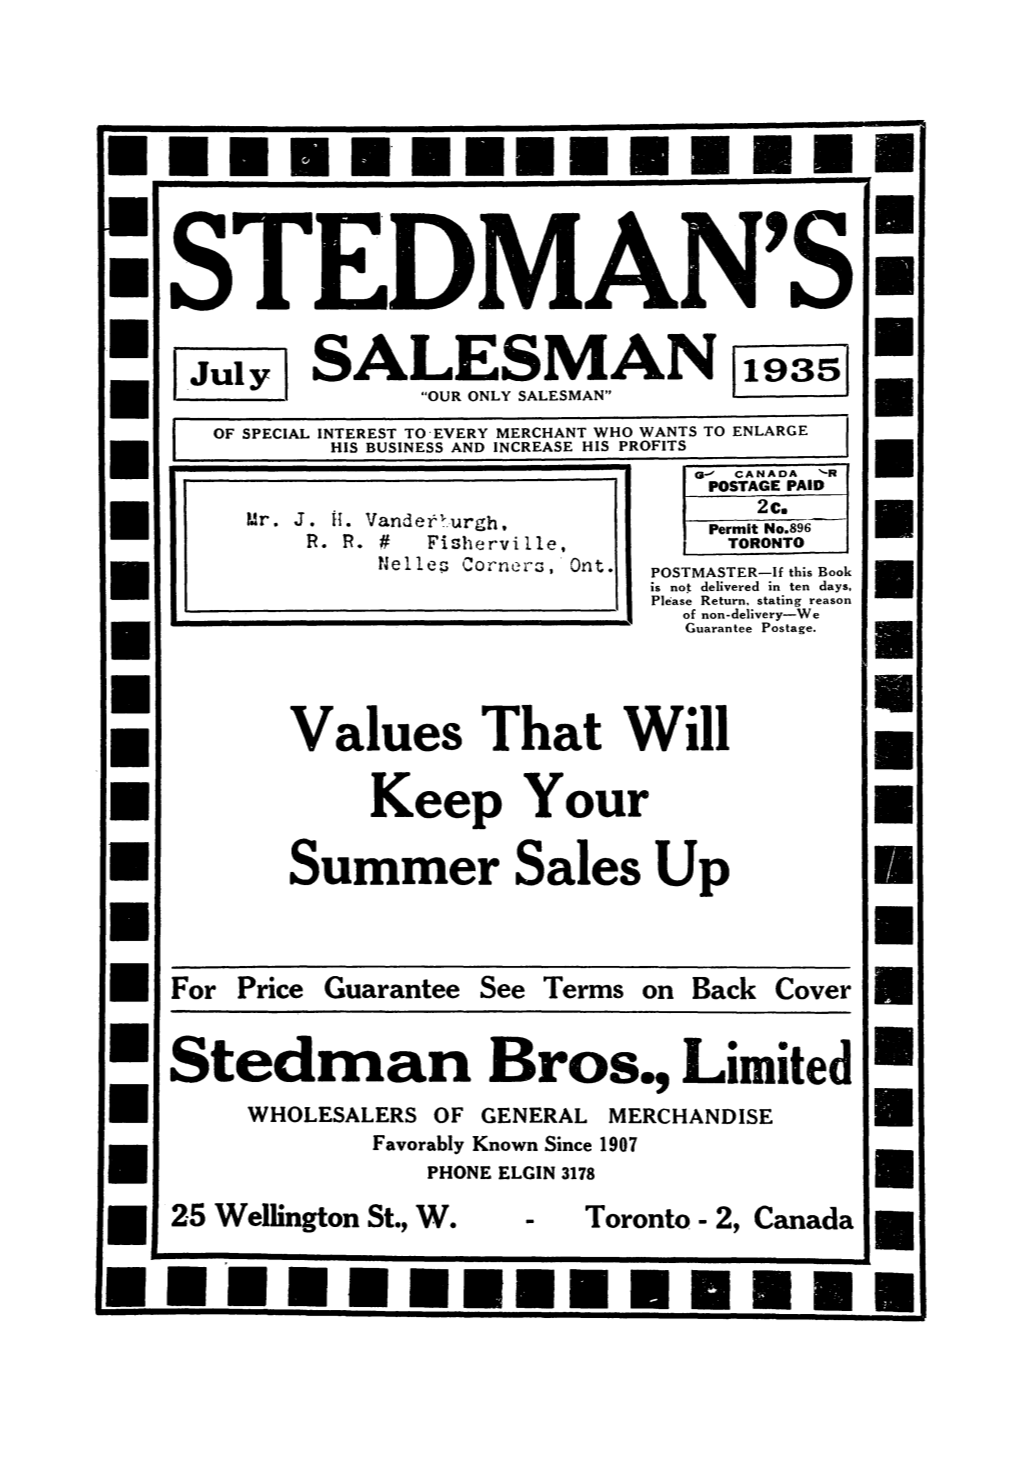 Stedman Bros., Limited WHOLESALERS of GENERAL MERCHANDISE Favorably Known Since 1907 PHONE ELGIN 3178 25 Wellington St., W